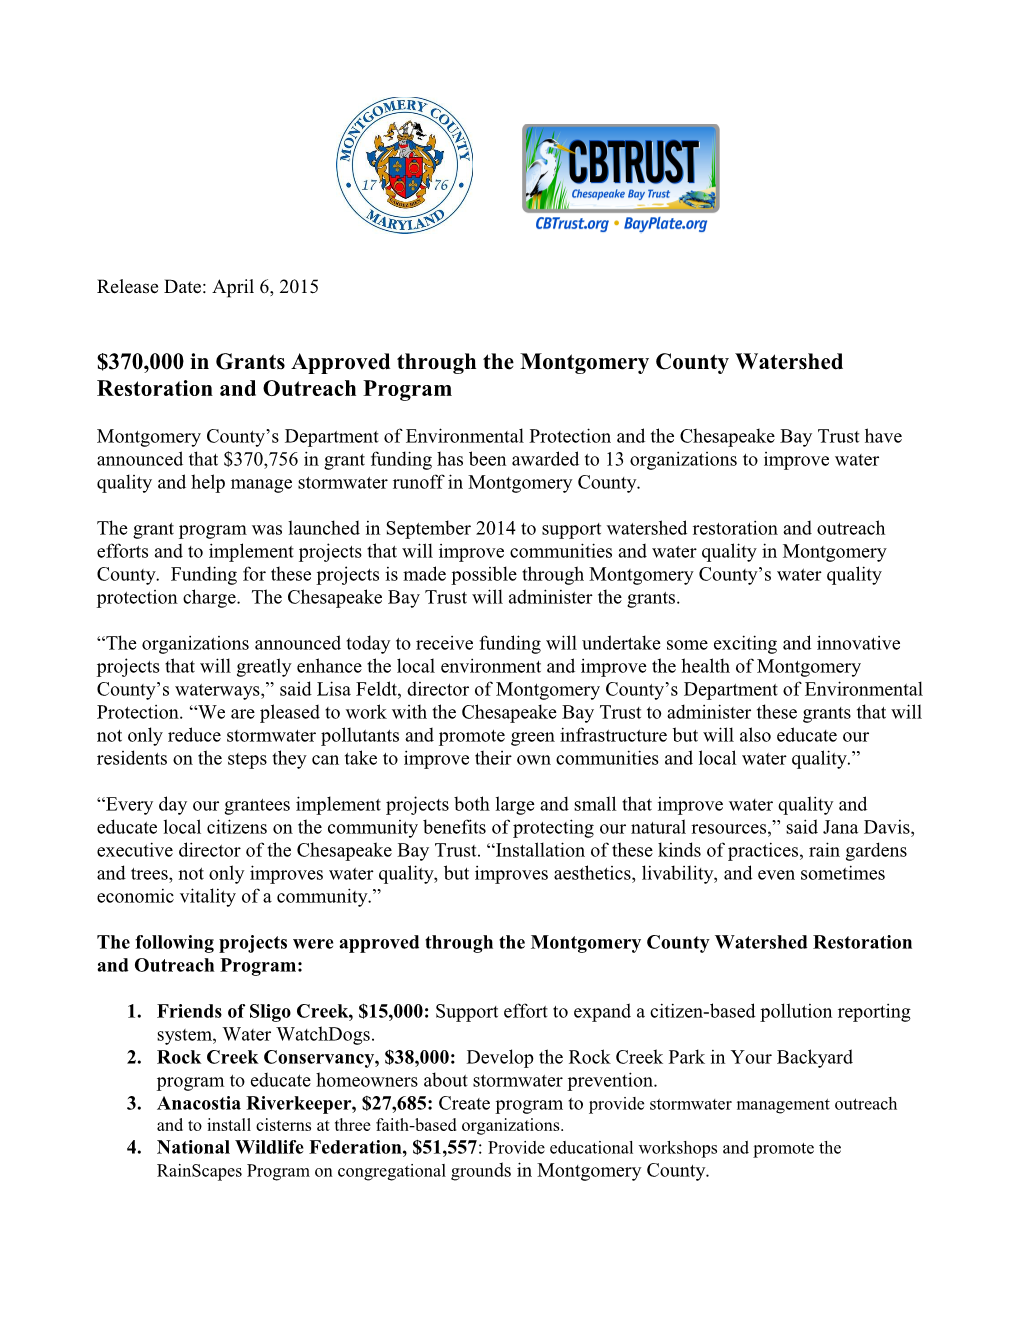 $370,000 in Grants Approved Through the Montgomery County Watershed Restoration and Outreach